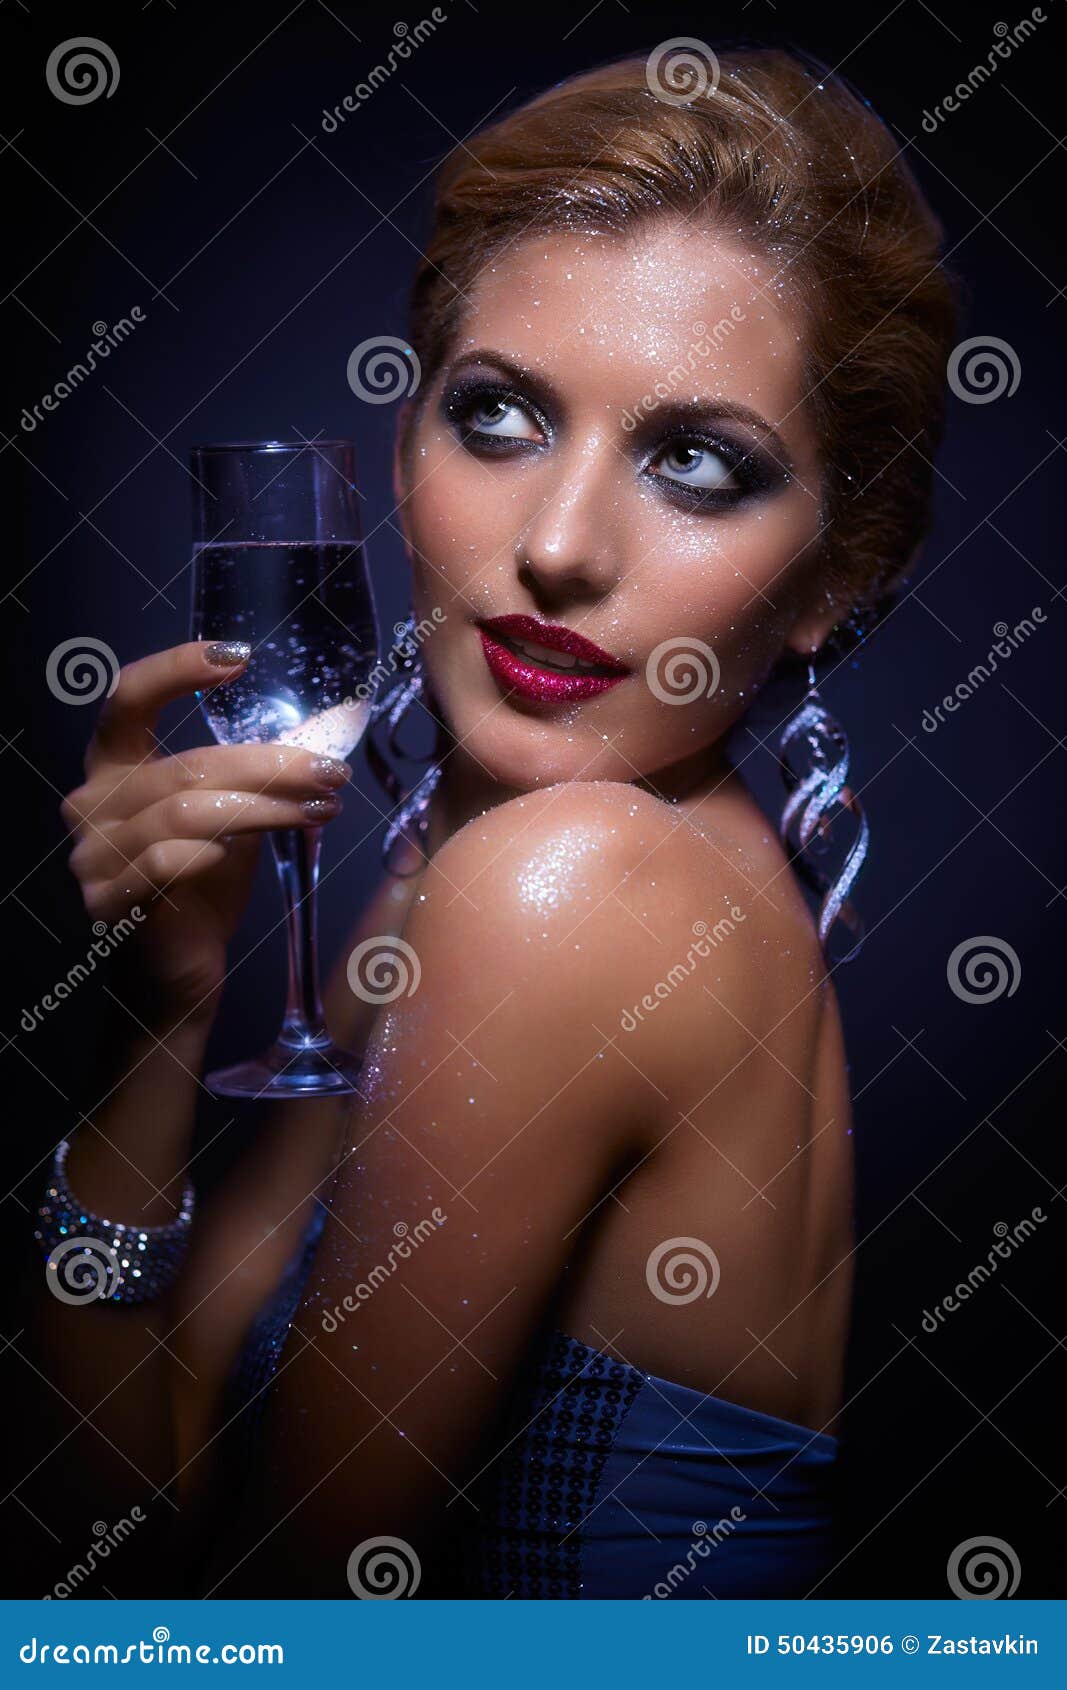 Elegant Woman with Big Boobs in Tight Blue Dress Holding Wineglass